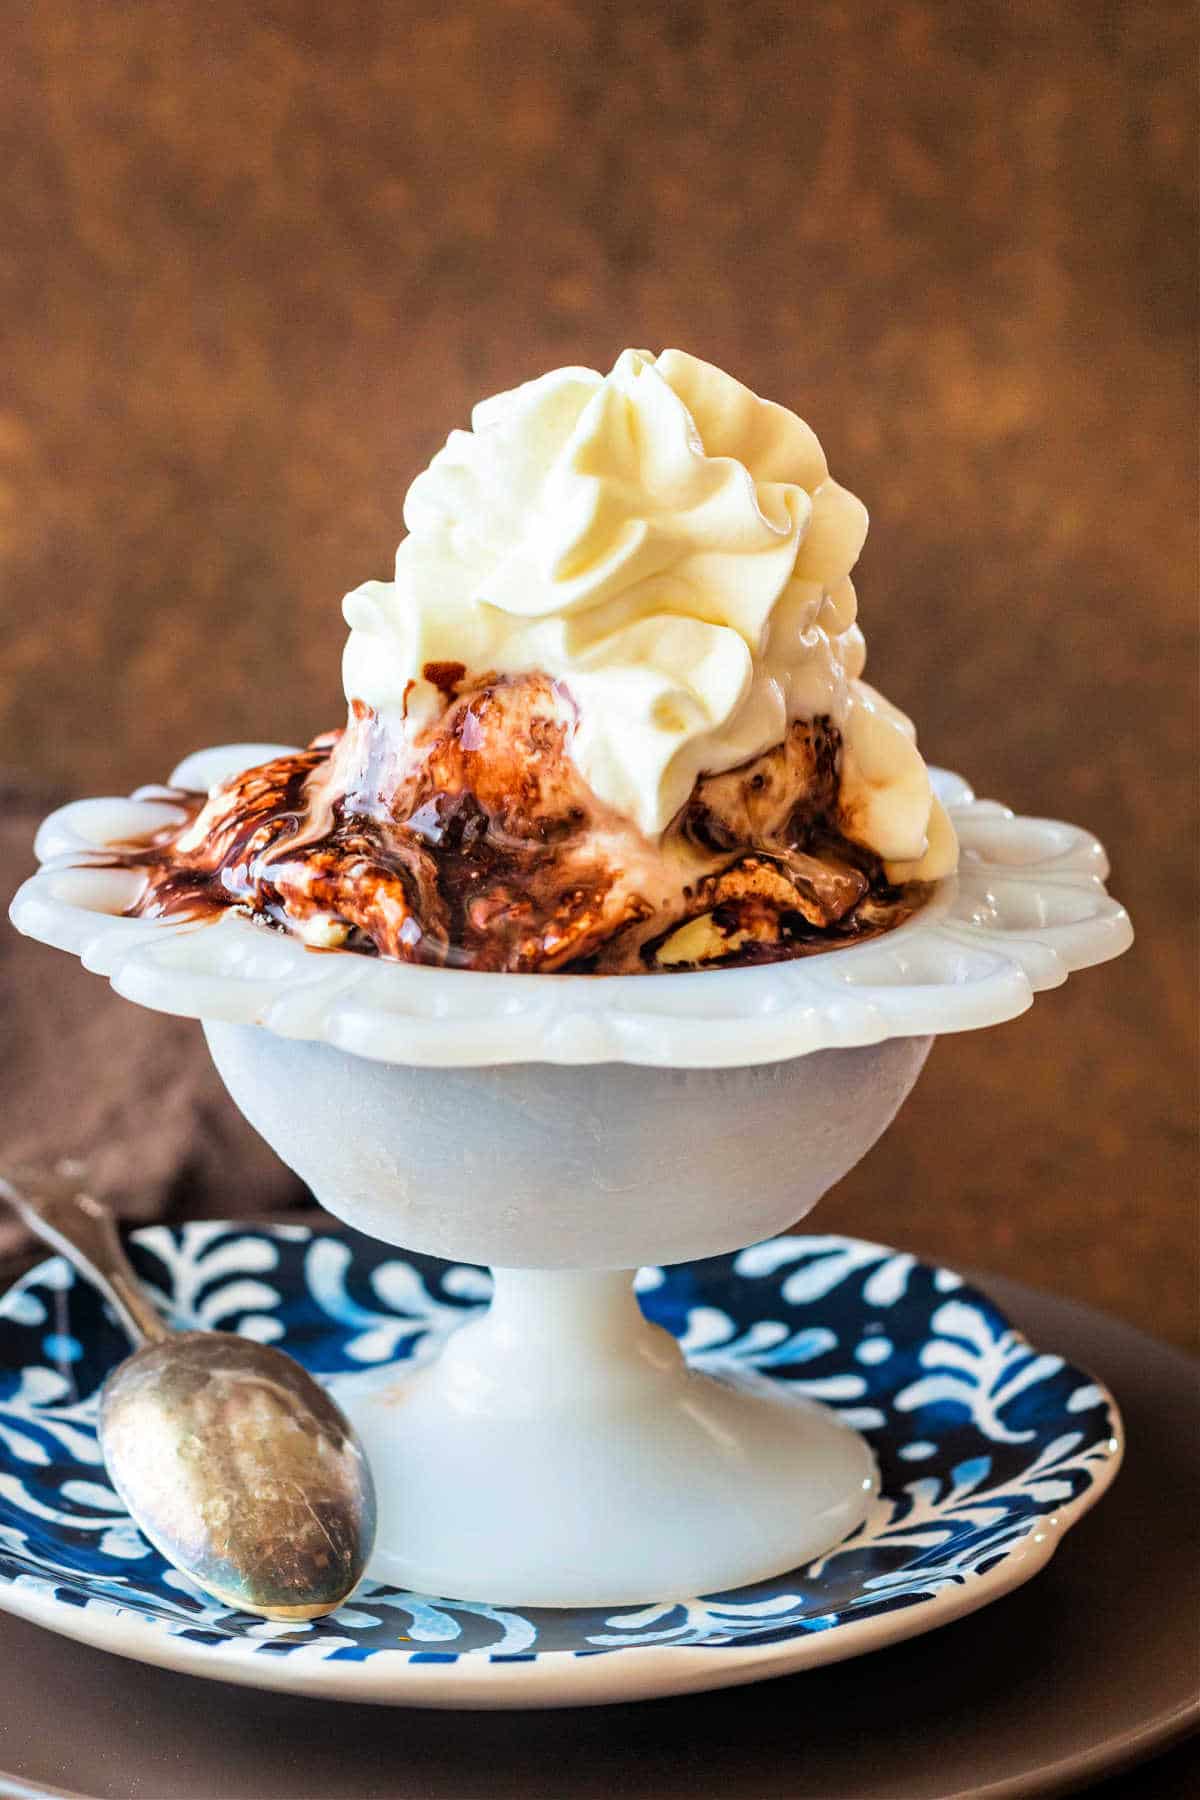 A shot of ice cream in a white dish with chocolate syrup and whipped cream on top.